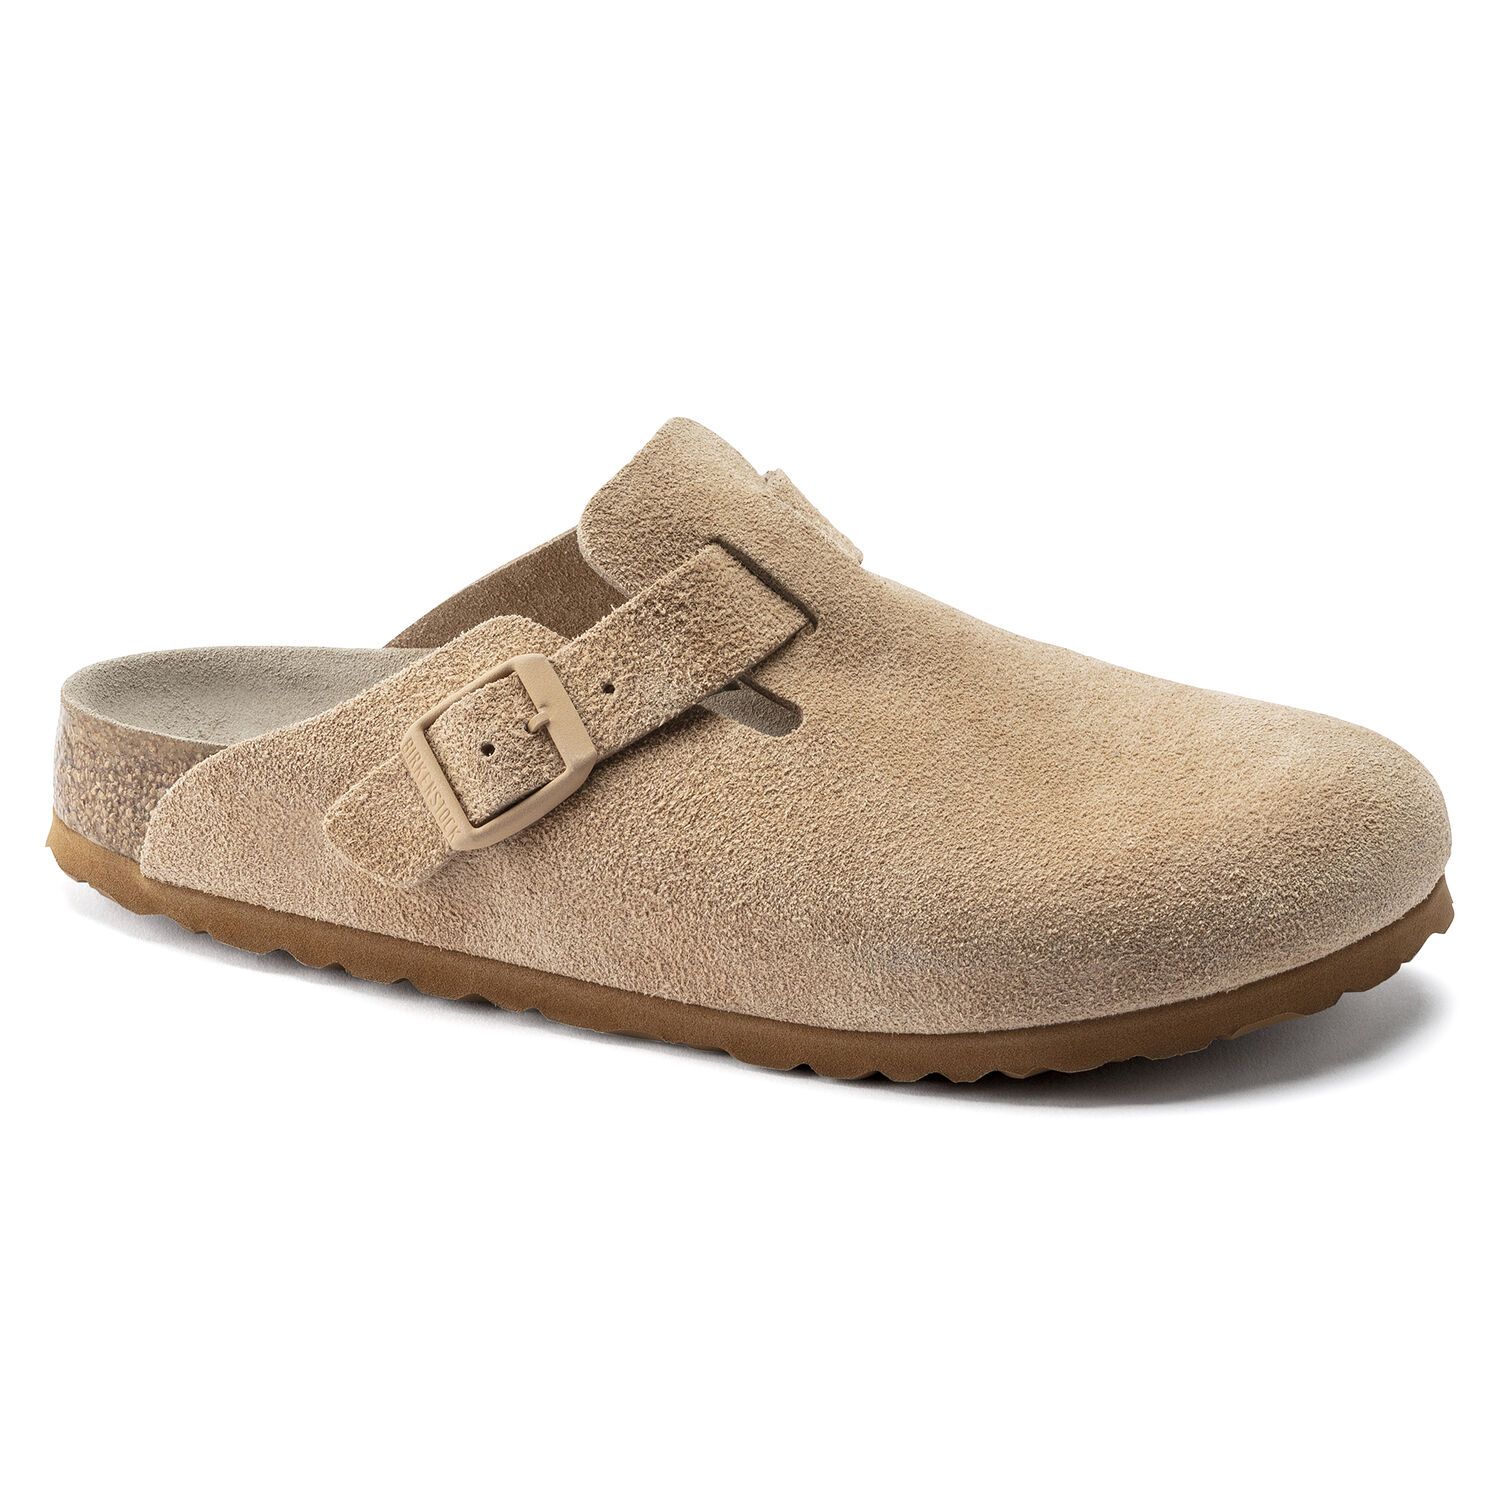 Boston Clog, Suede Leather